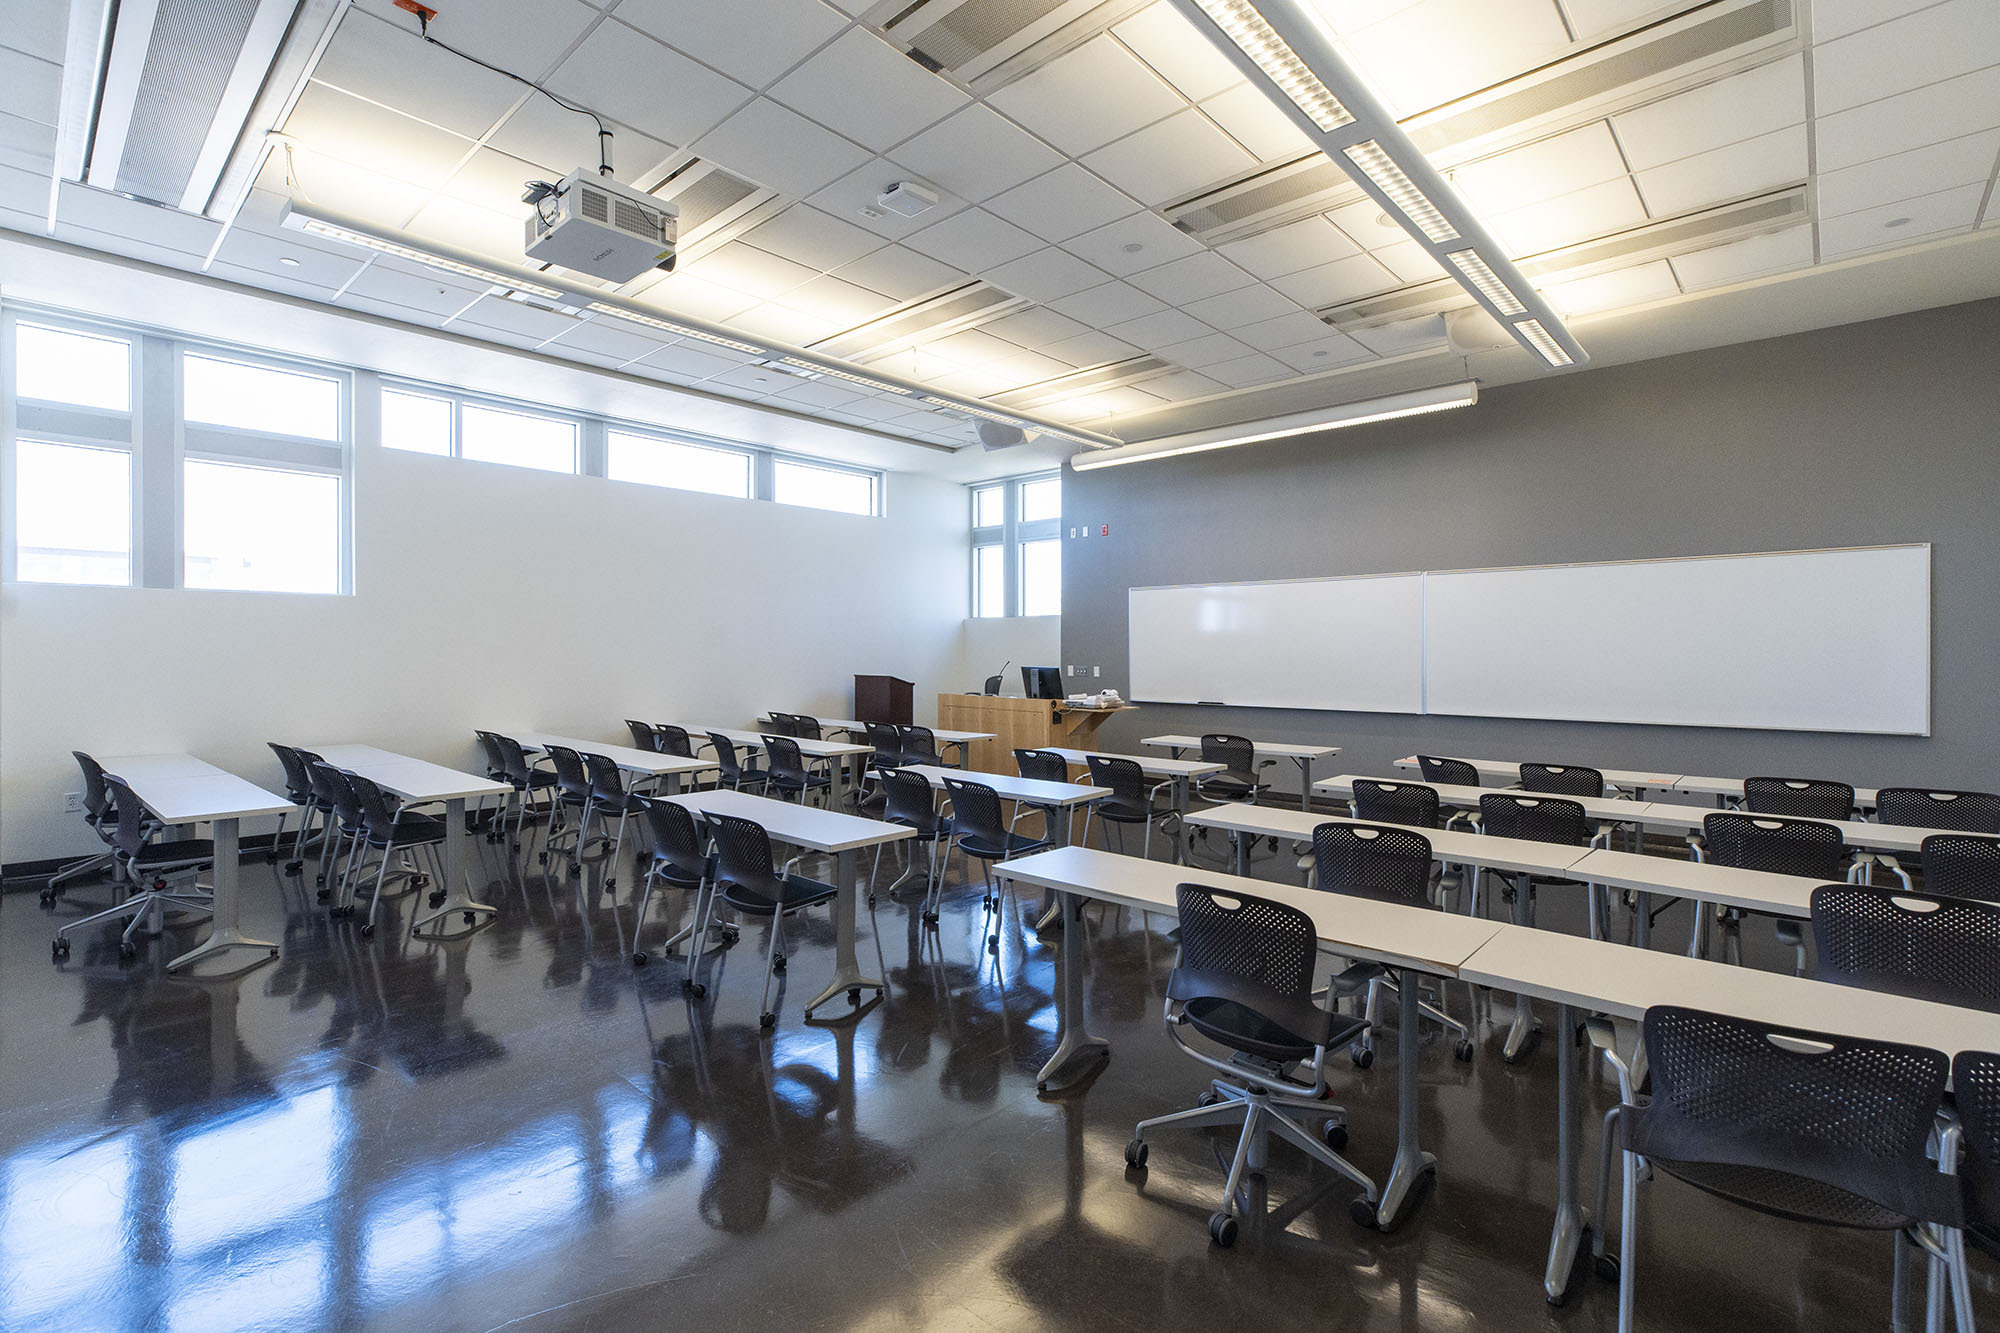 rear view of a UNLV classroom with long whoteboard.